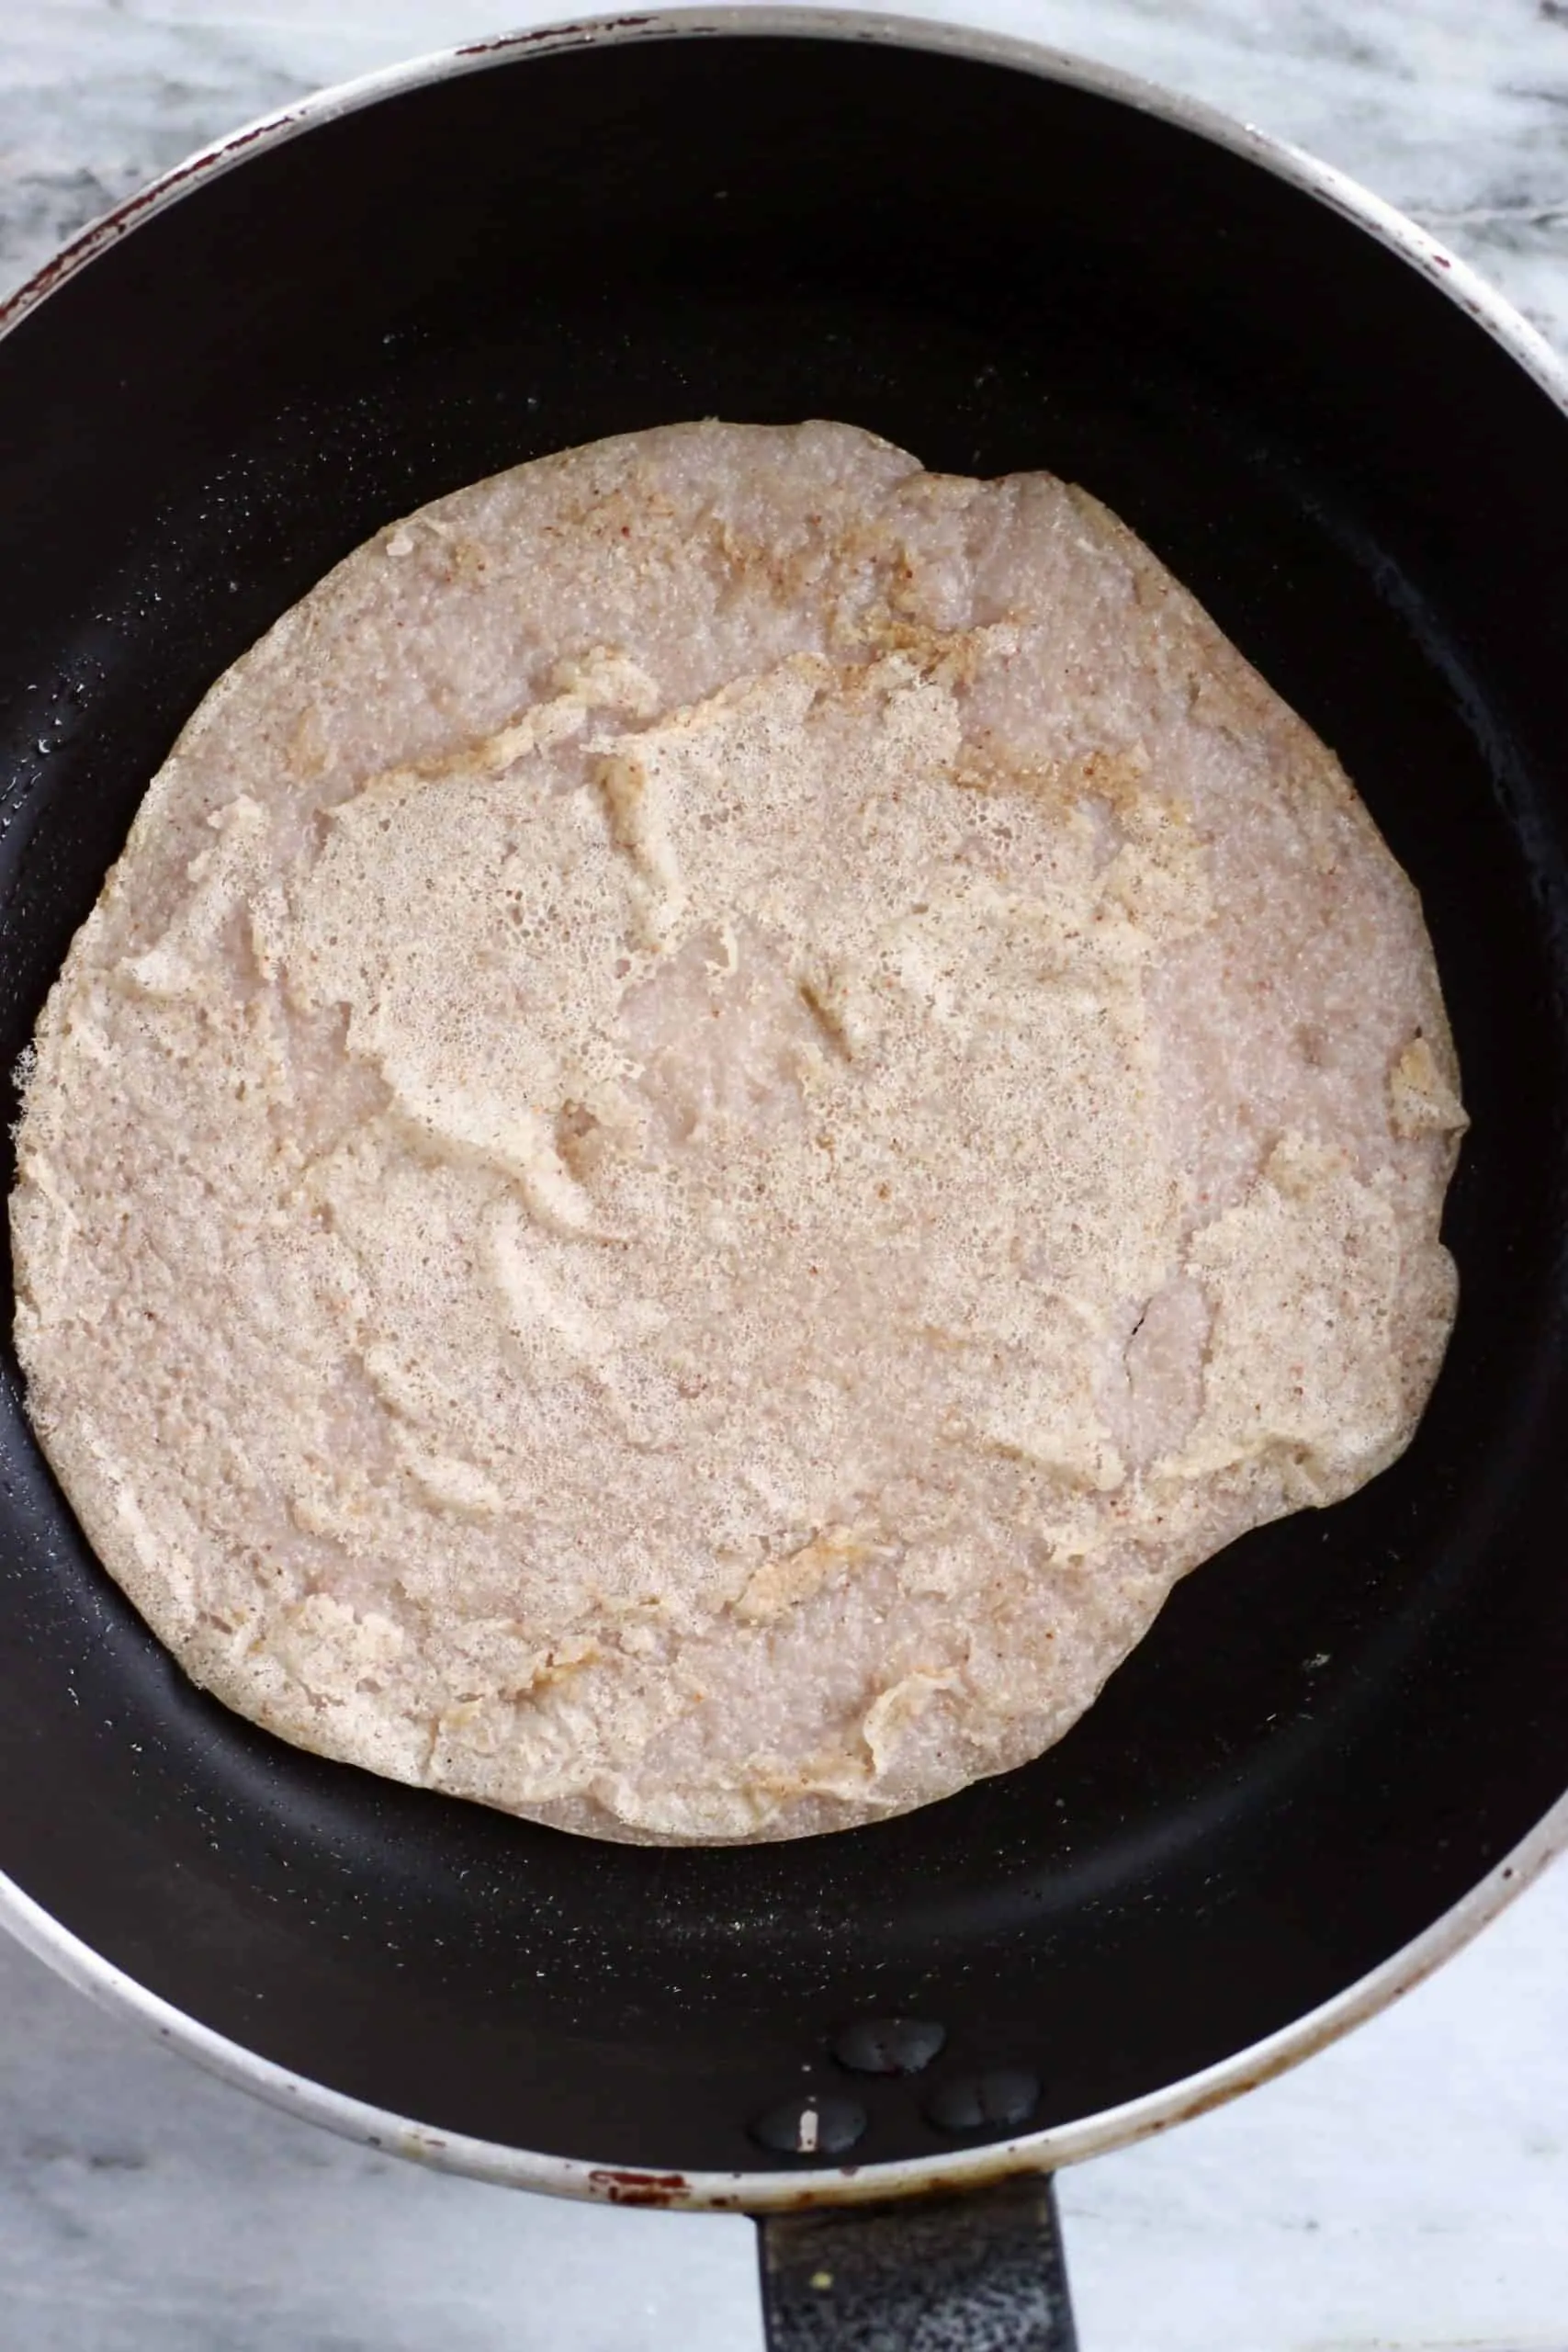 A buckwheat crepe being cooked in a black frying pan